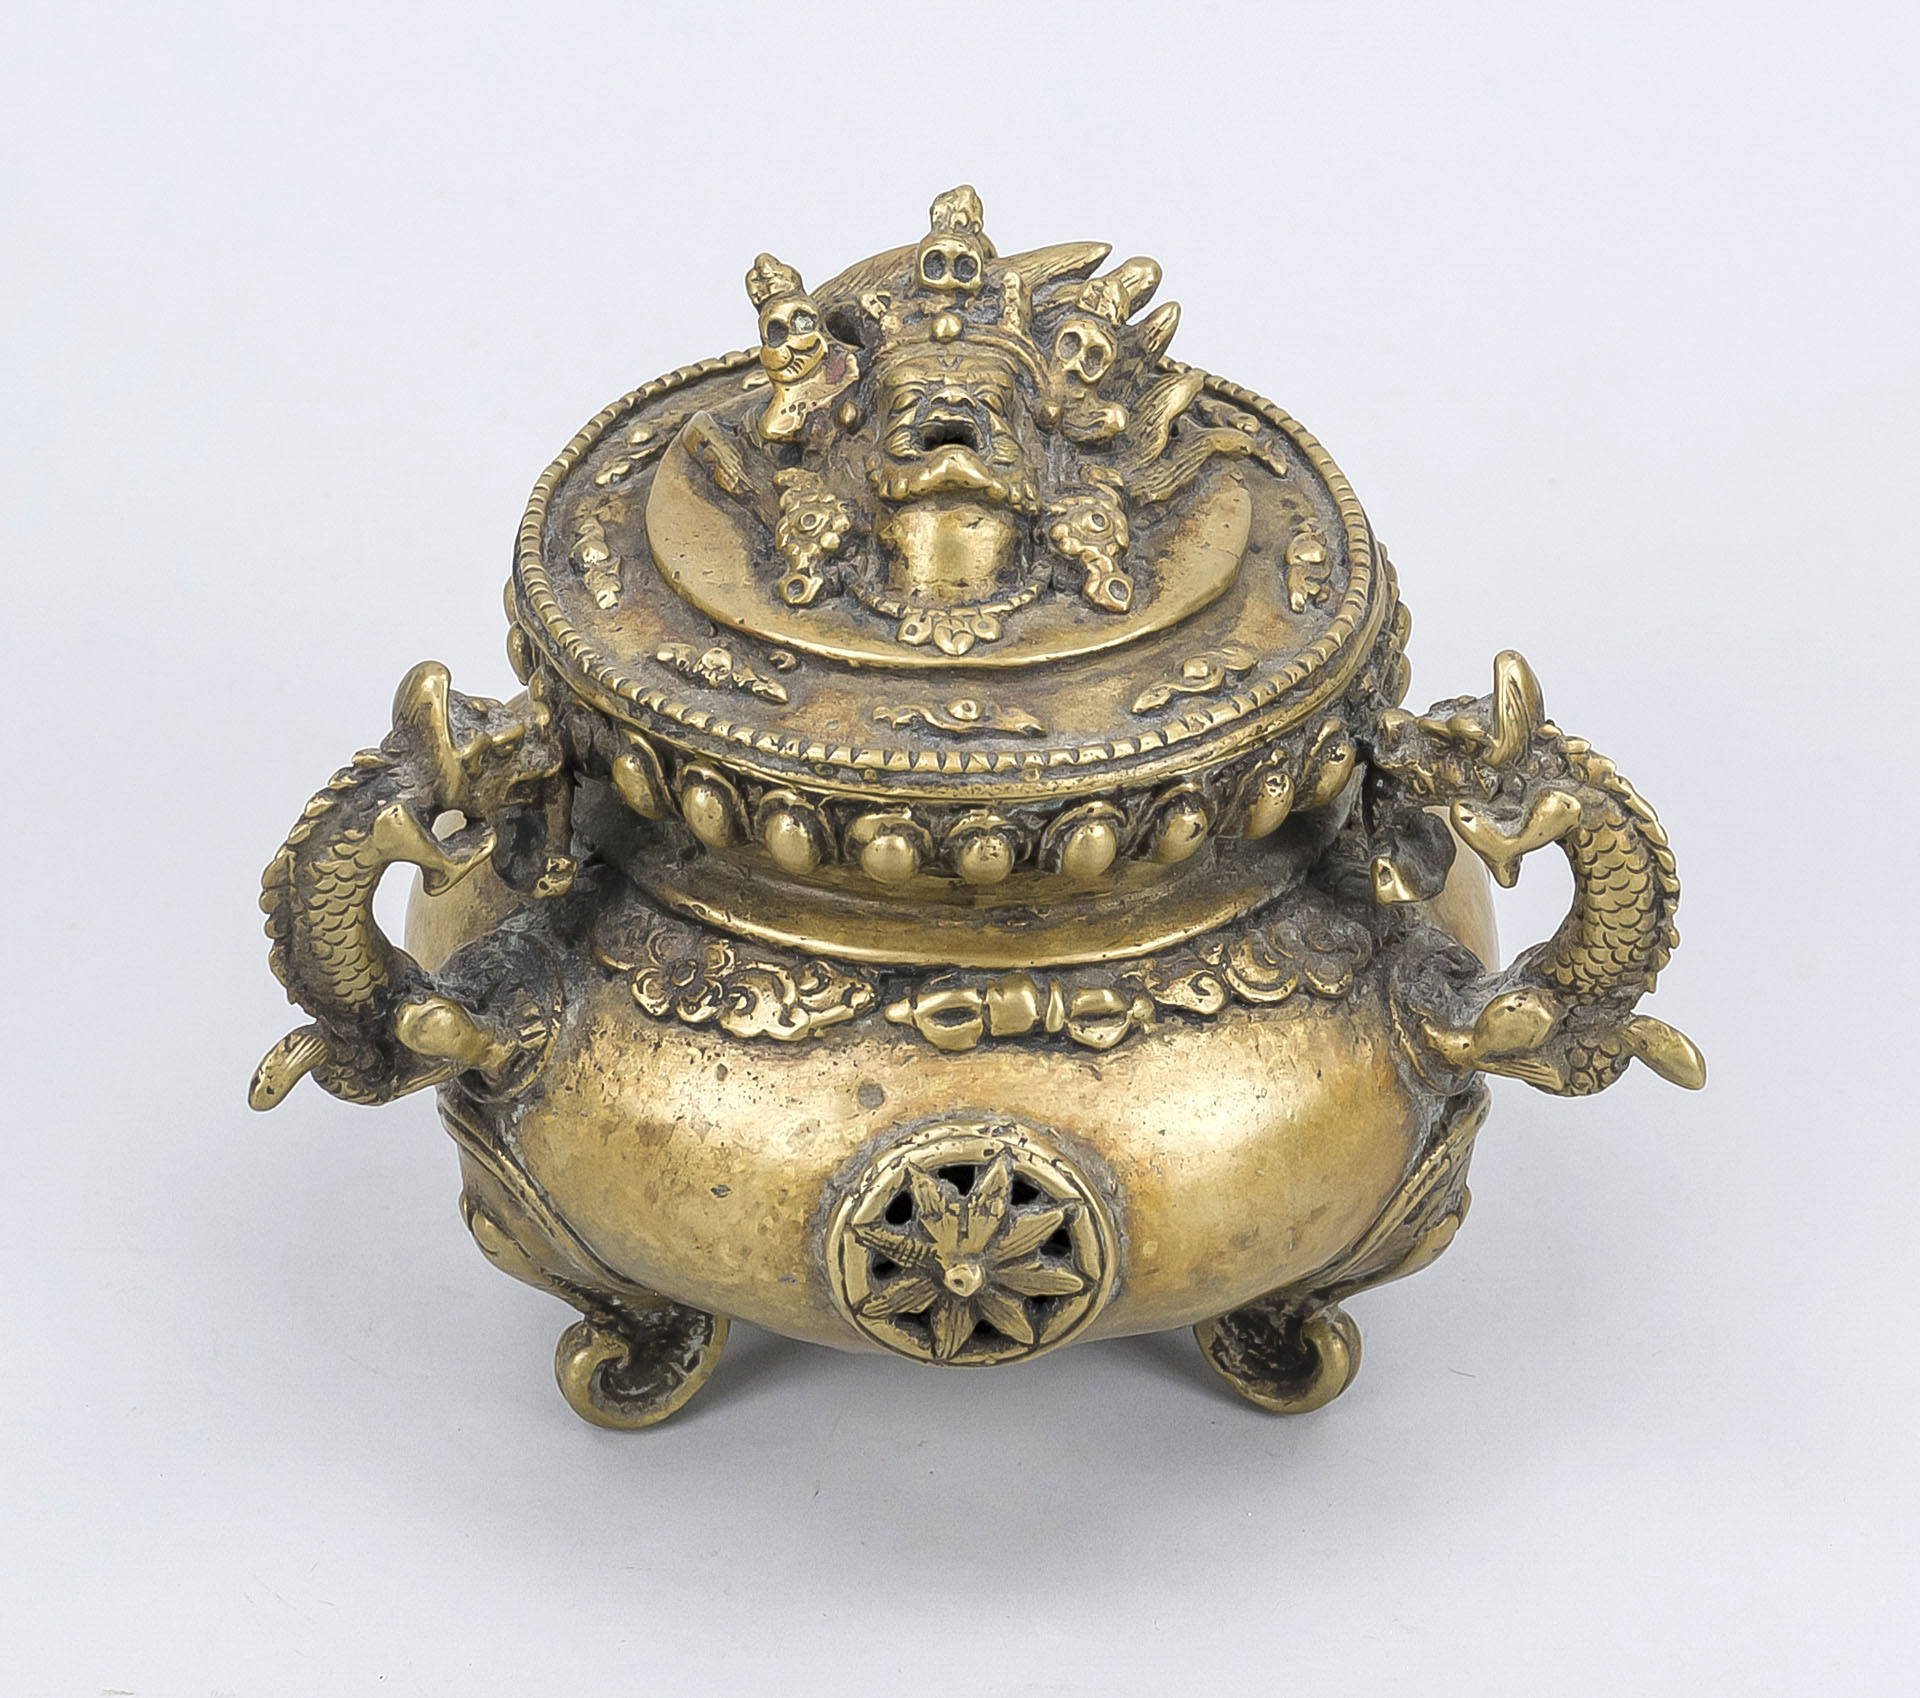 Censer, Tibet/China, bronze. Exact age unknown. Bellied body with relief decoration, lid with